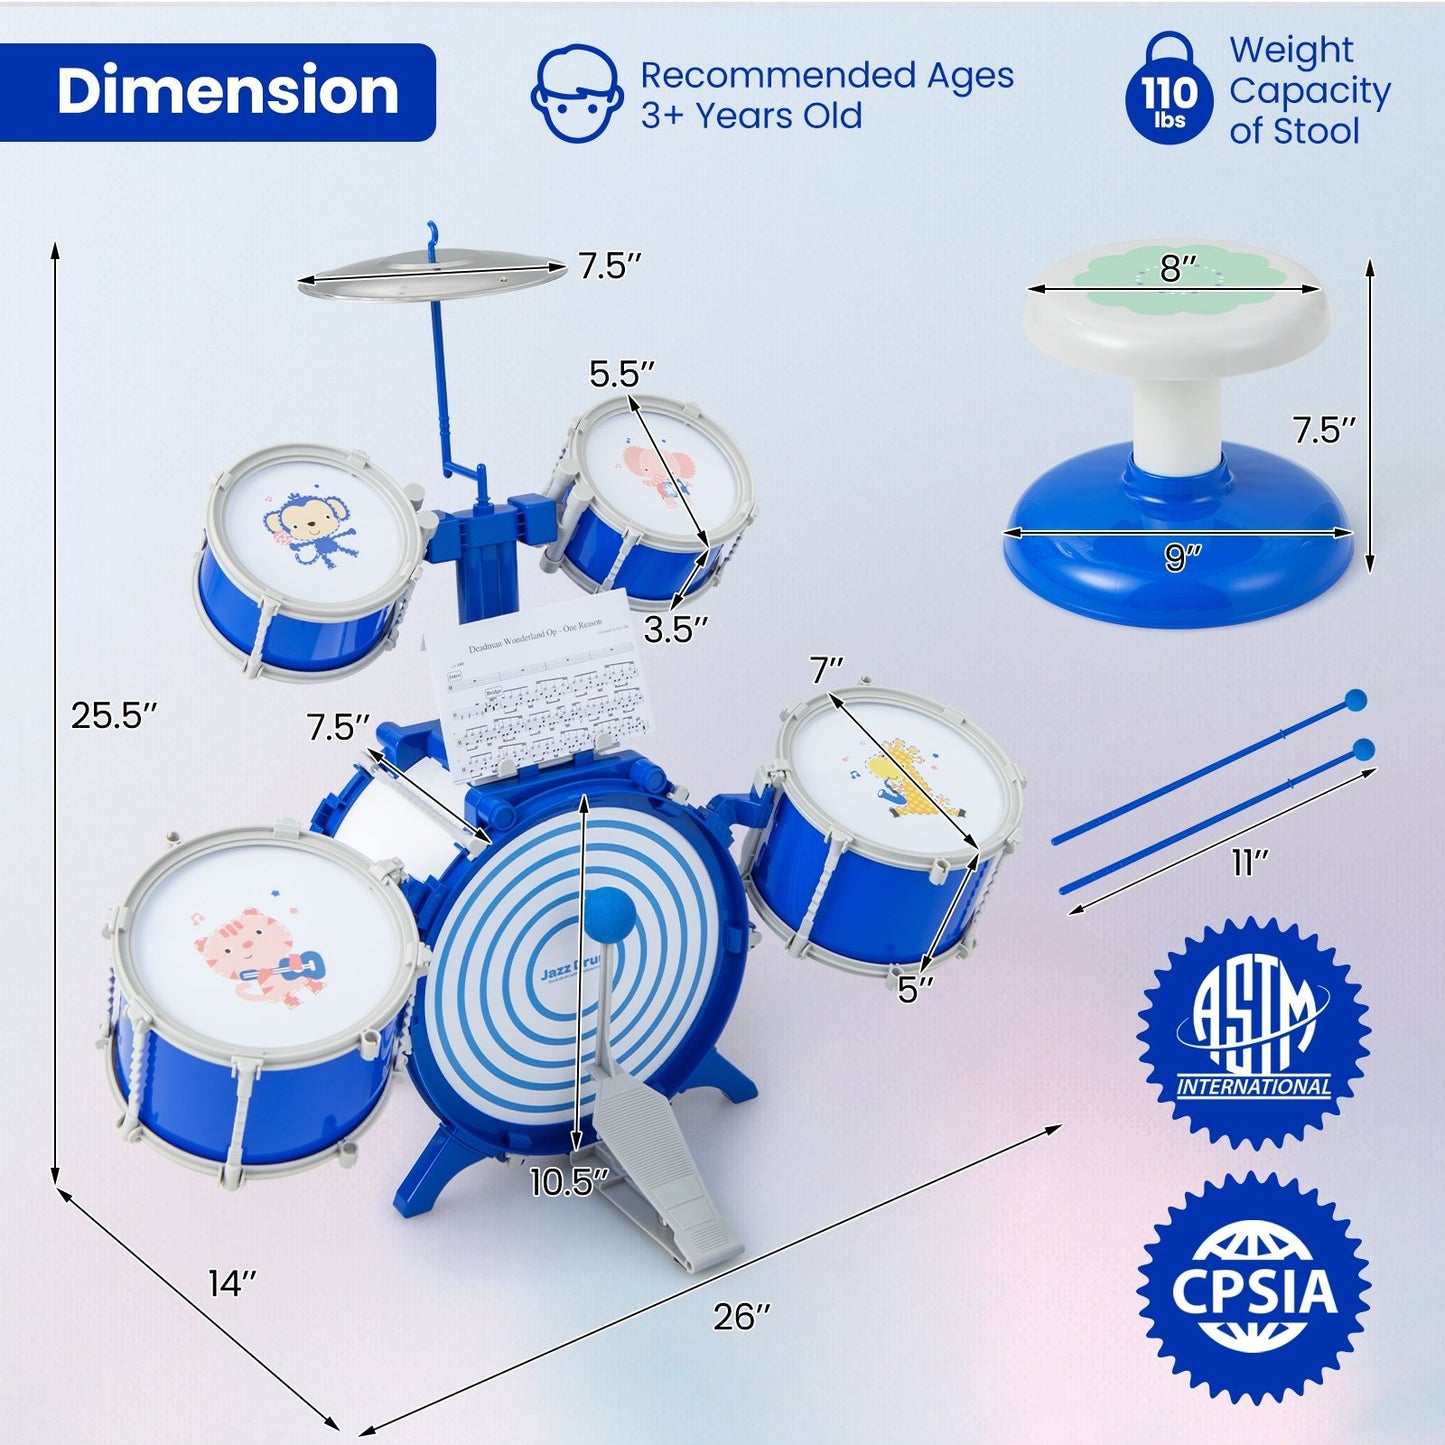 Kids Drum Set Educational Percussion Musical Instrument Toy with Bass Drum, Blue